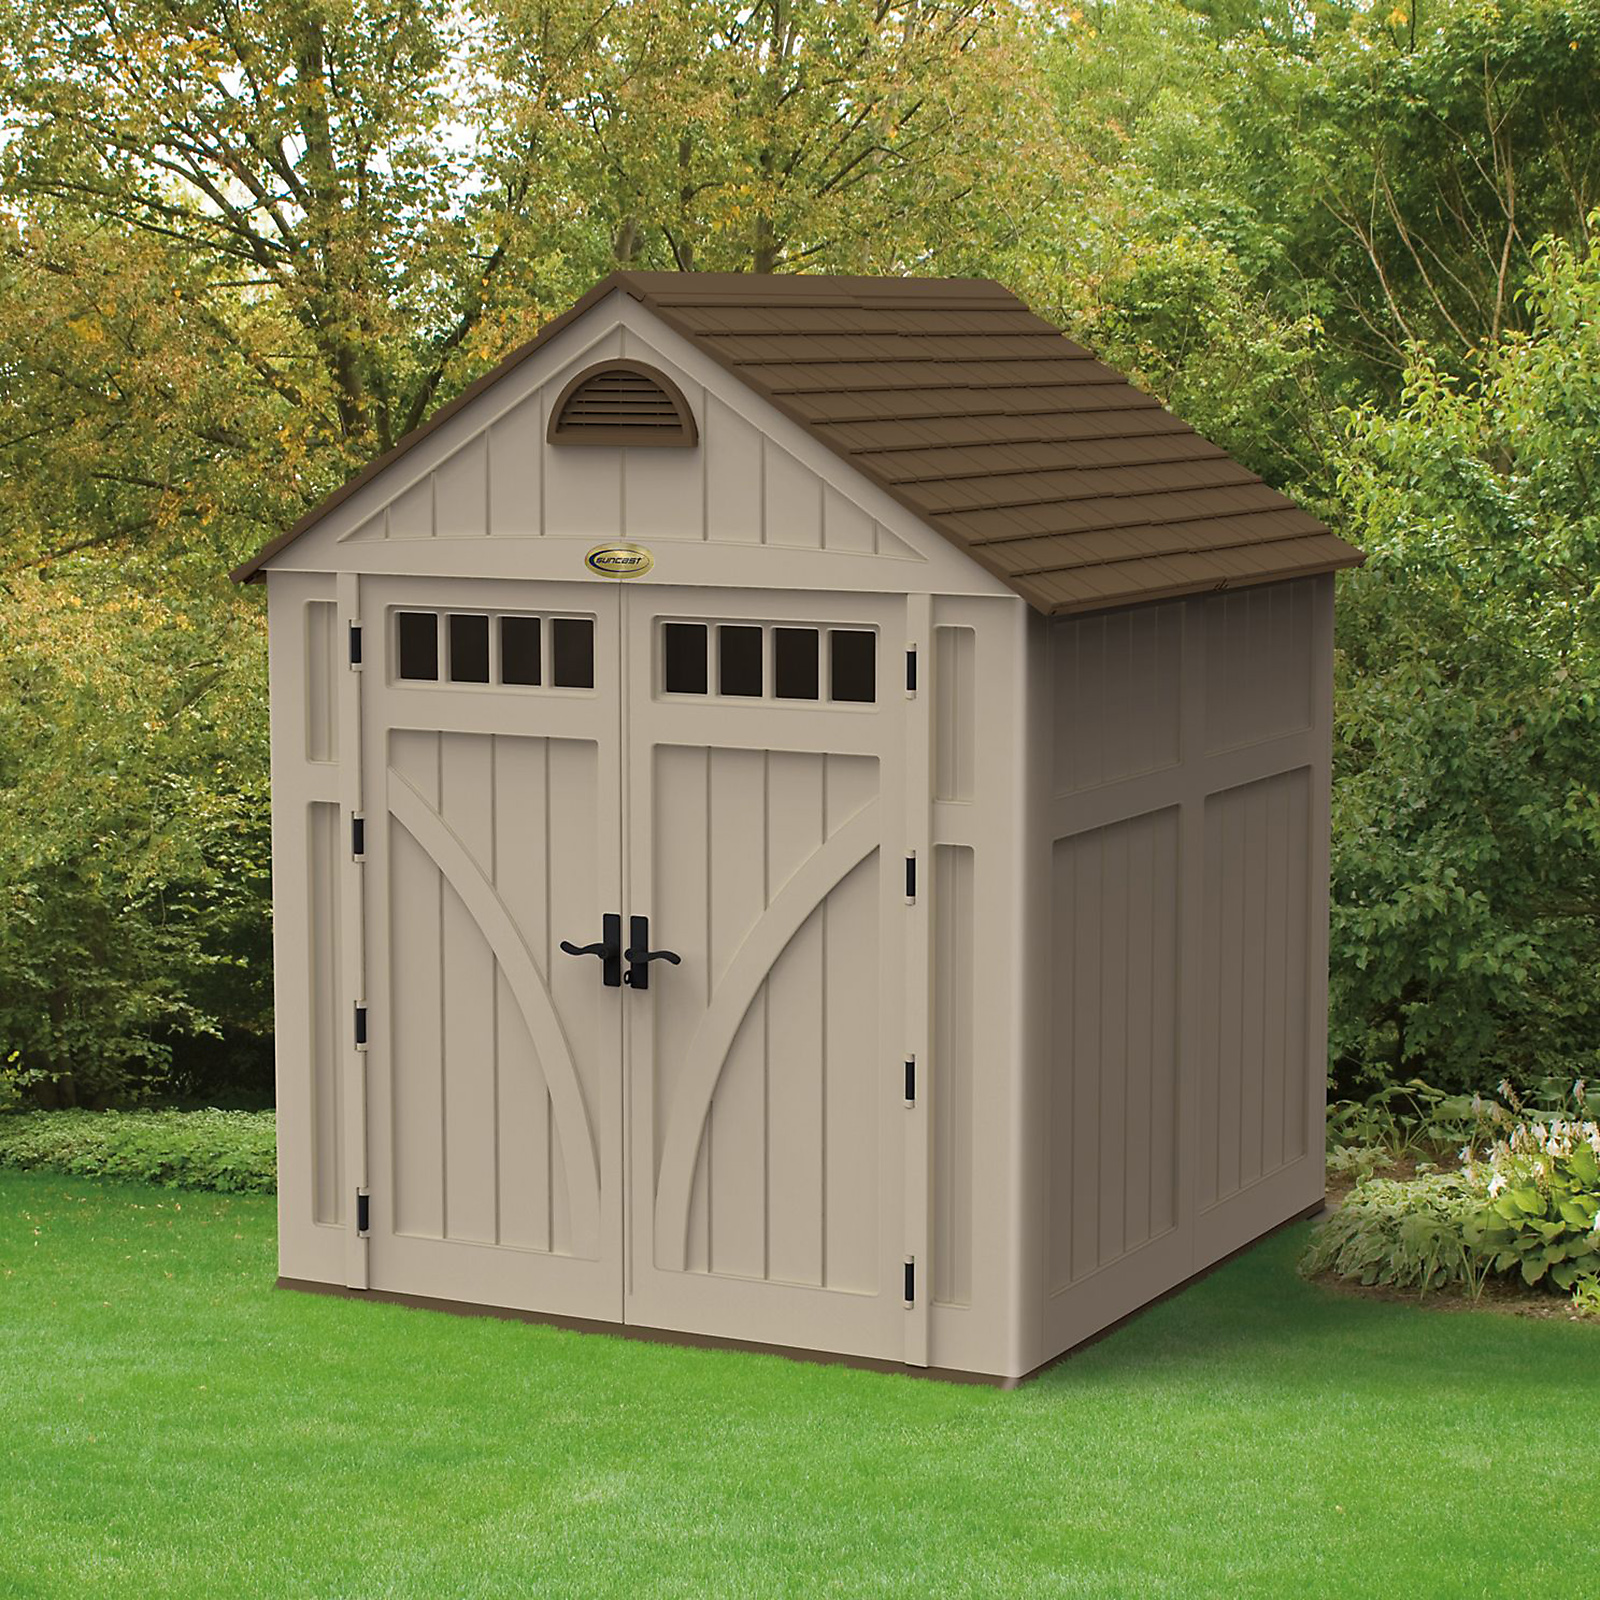 Storage shed 7 ft x 7 ft: Store it Right with Sears